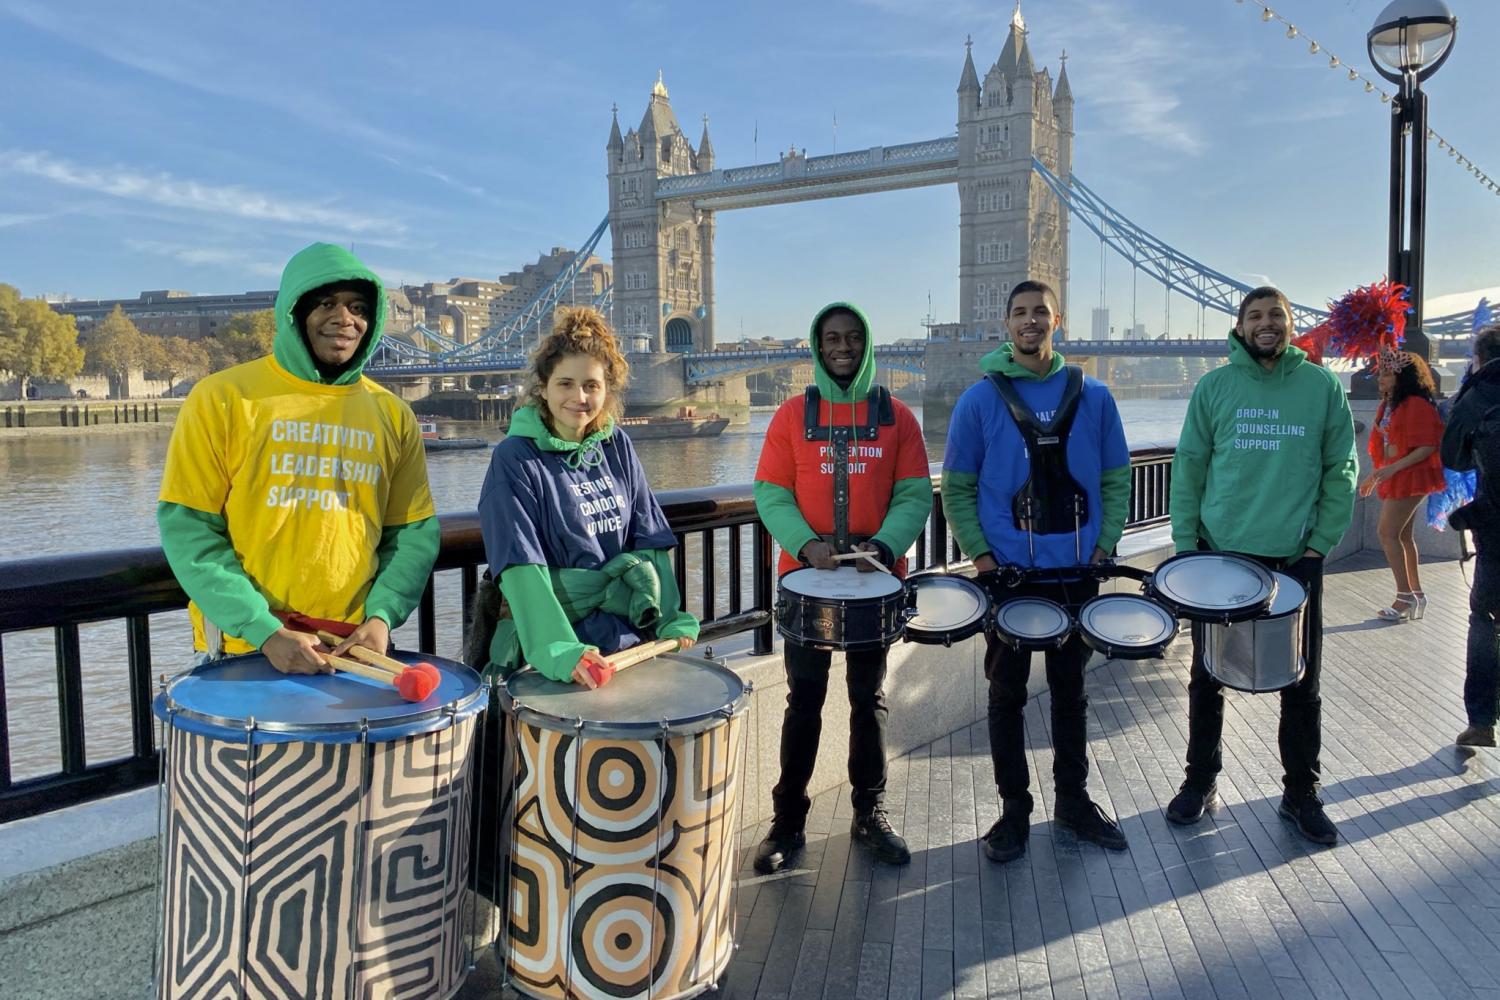 Group shot of smiling people wearing METRO hoodies, holding drums, with Tower Bridge in the background